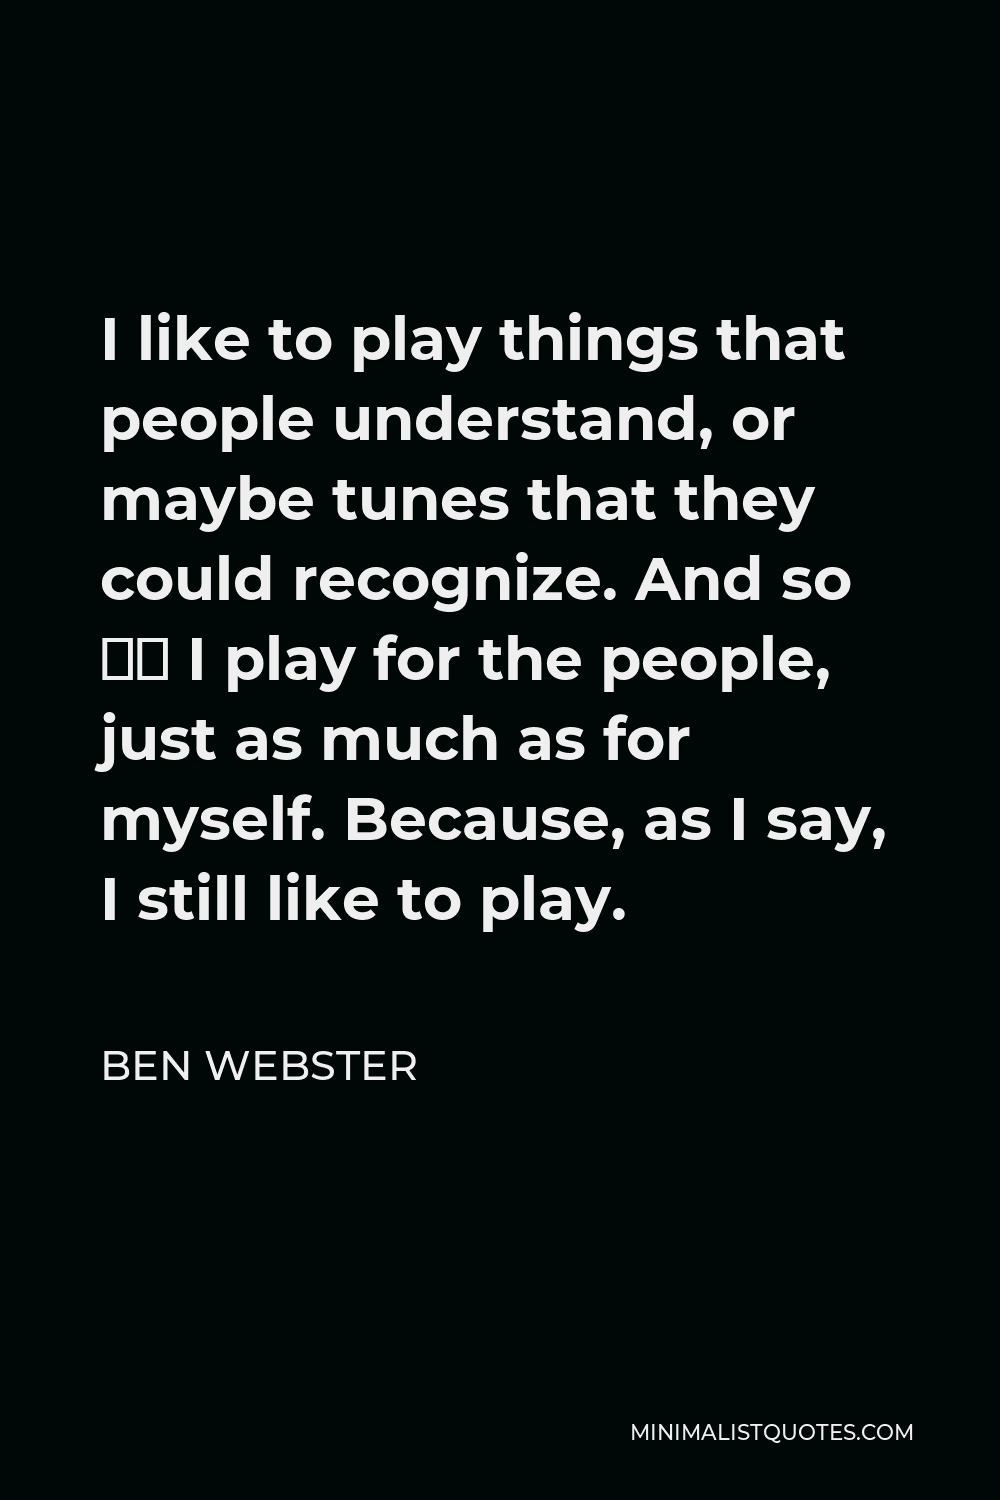 Ben Webster Quote - I like to play things that people understand, or maybe tunes that they could recognize. And so — I play for the people, just as much as for myself. Because, as I say, I still like to play.